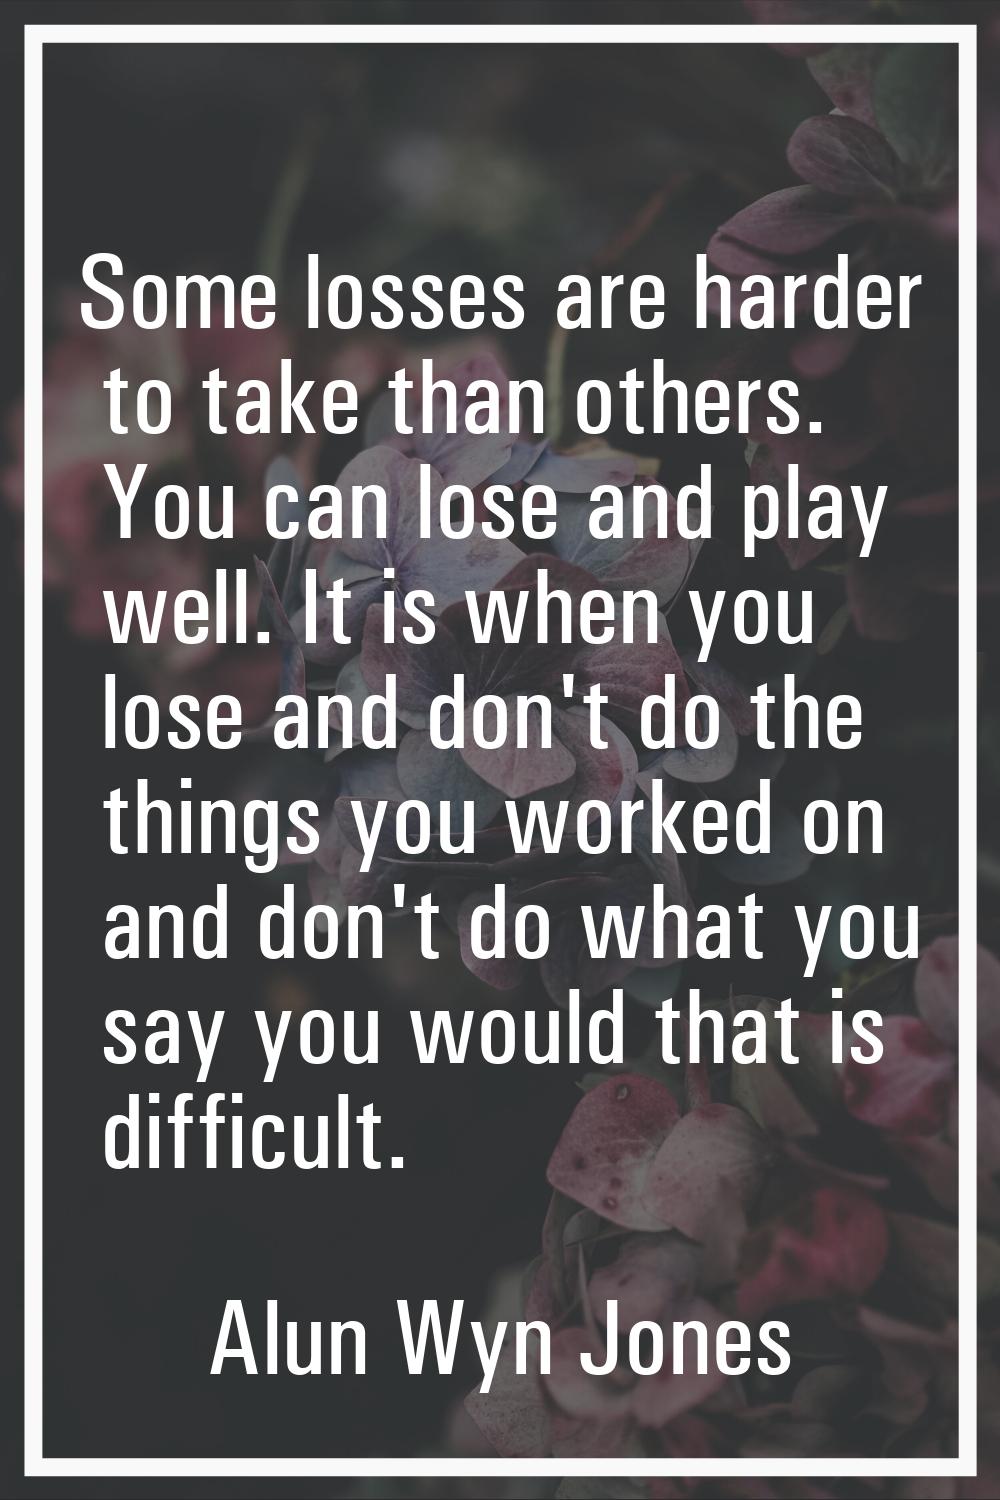 Some losses are harder to take than others. You can lose and play well. It is when you lose and don